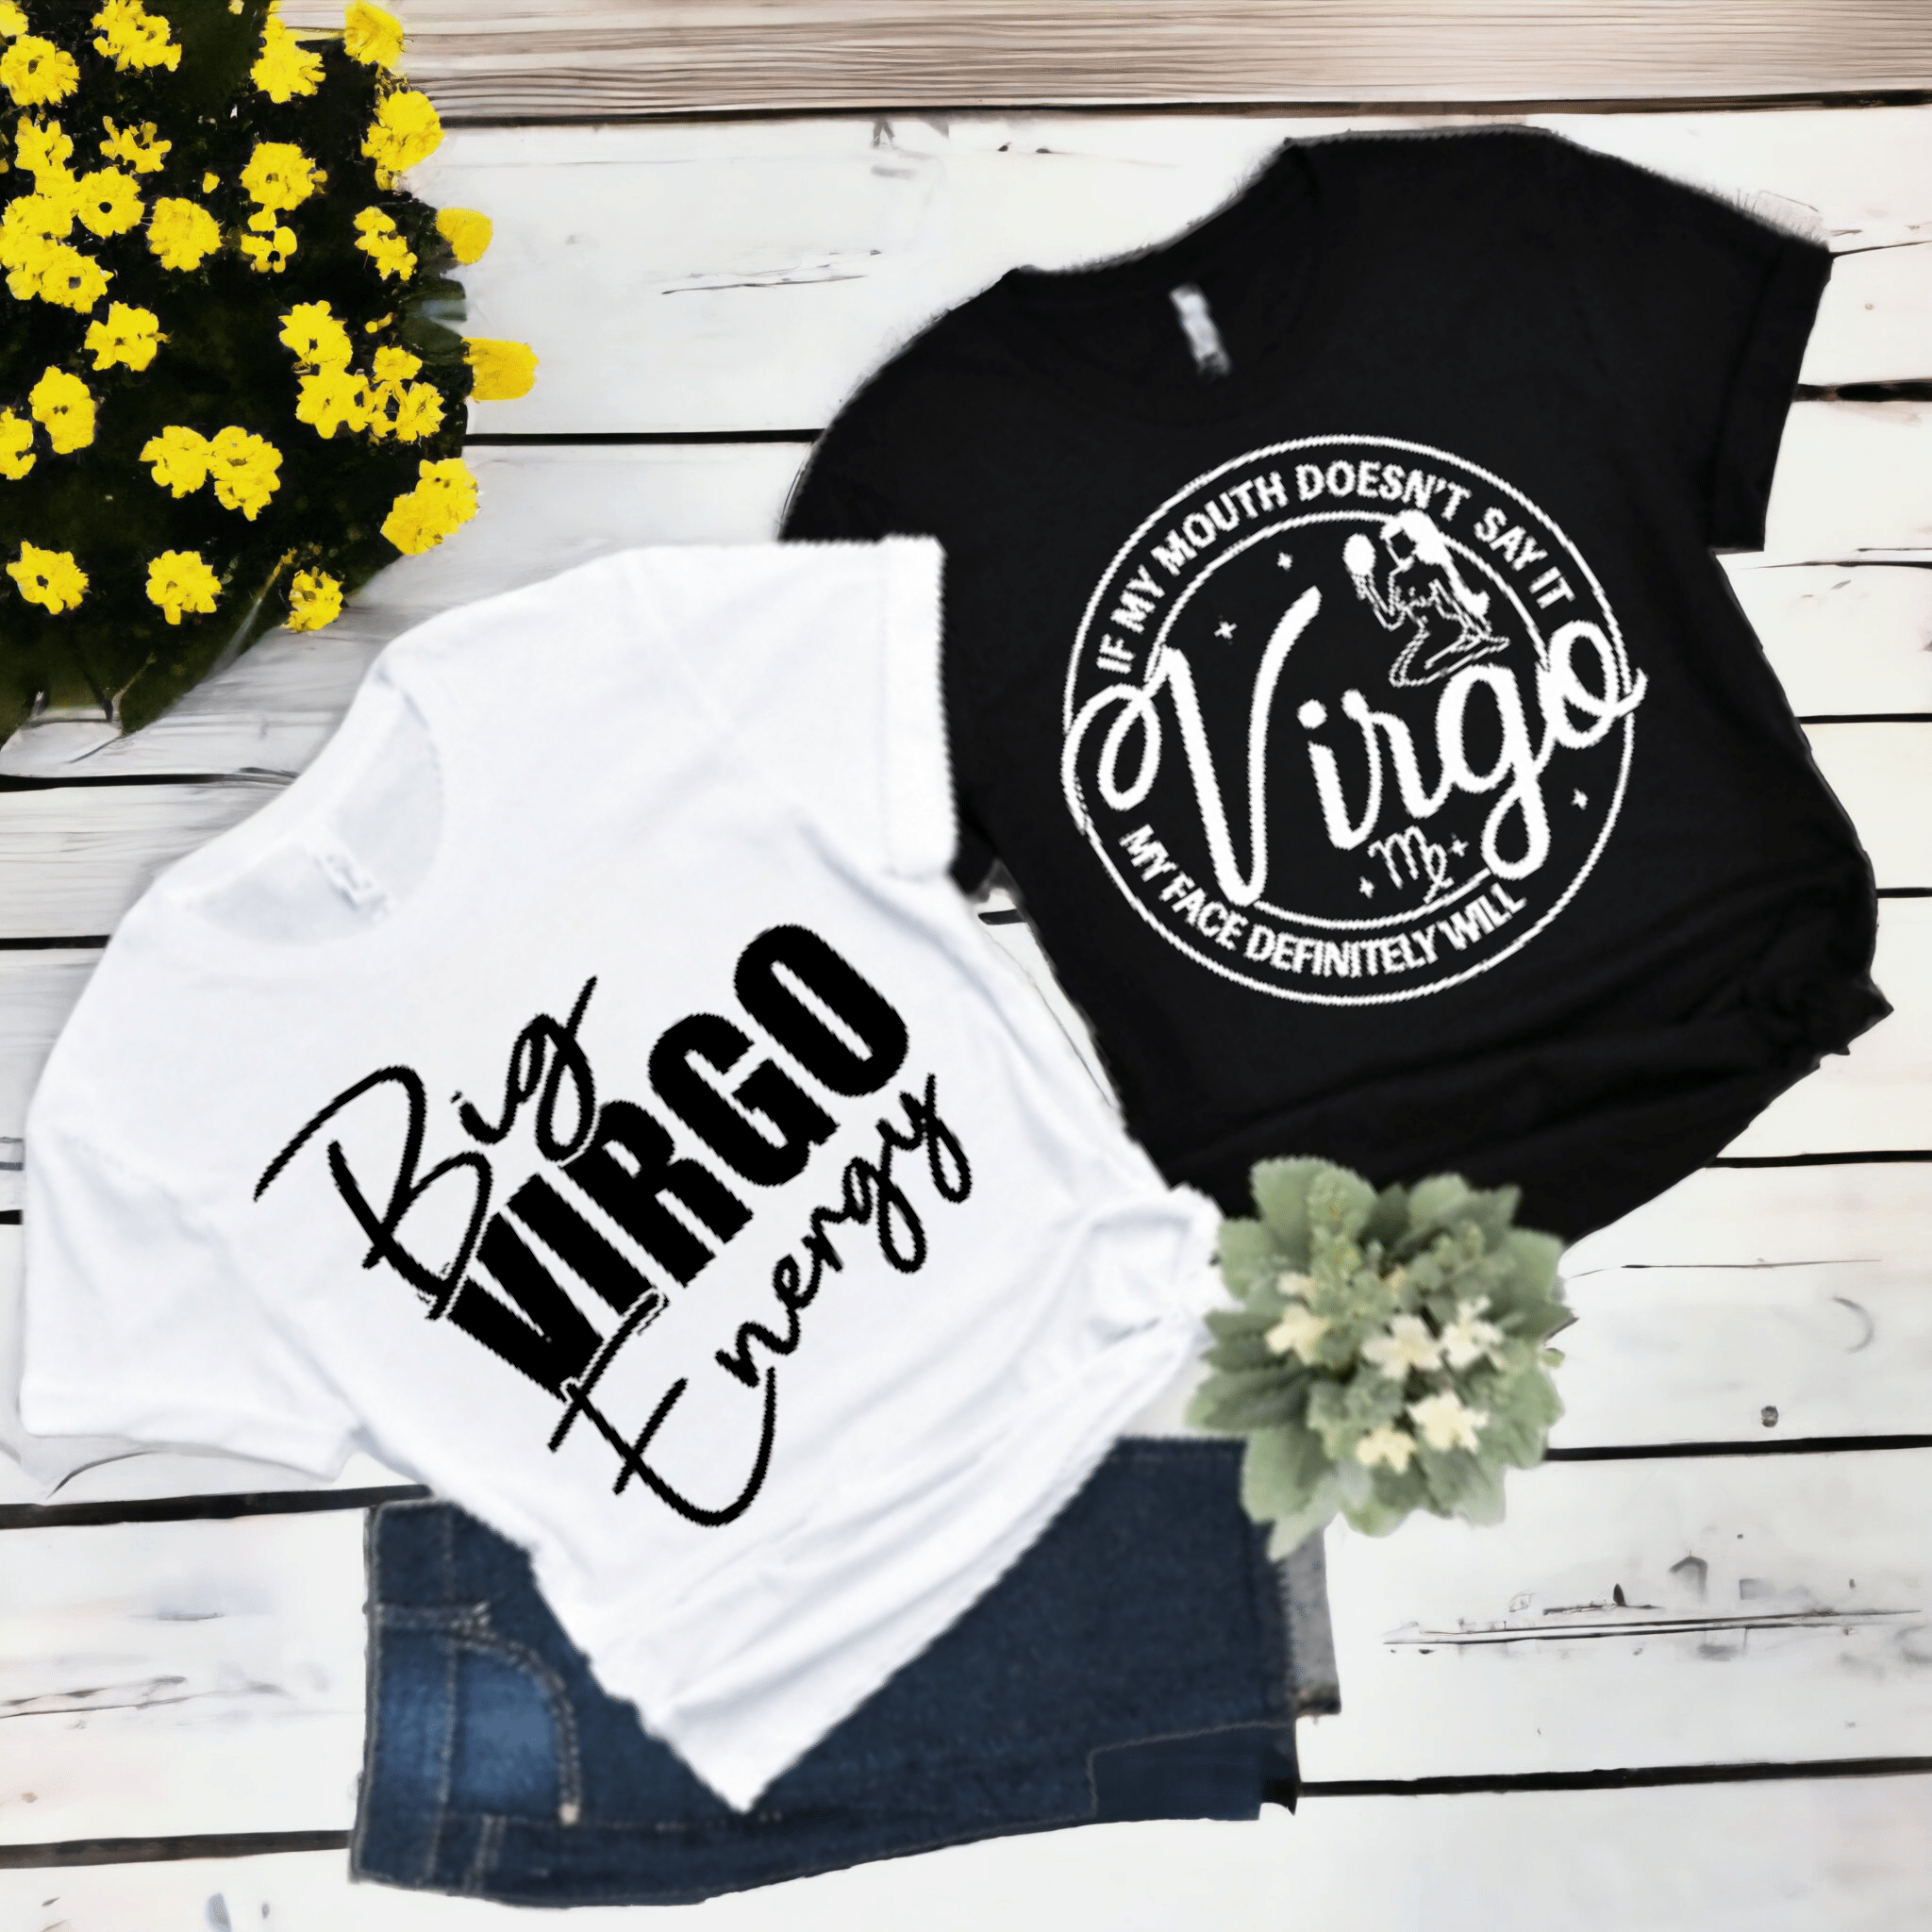 Virgo Zodiac Print, Women & Unisex T-shirt, CLEARANCE SALE small Size  Unisex Free Shipping on Purchases Over 20 USD 